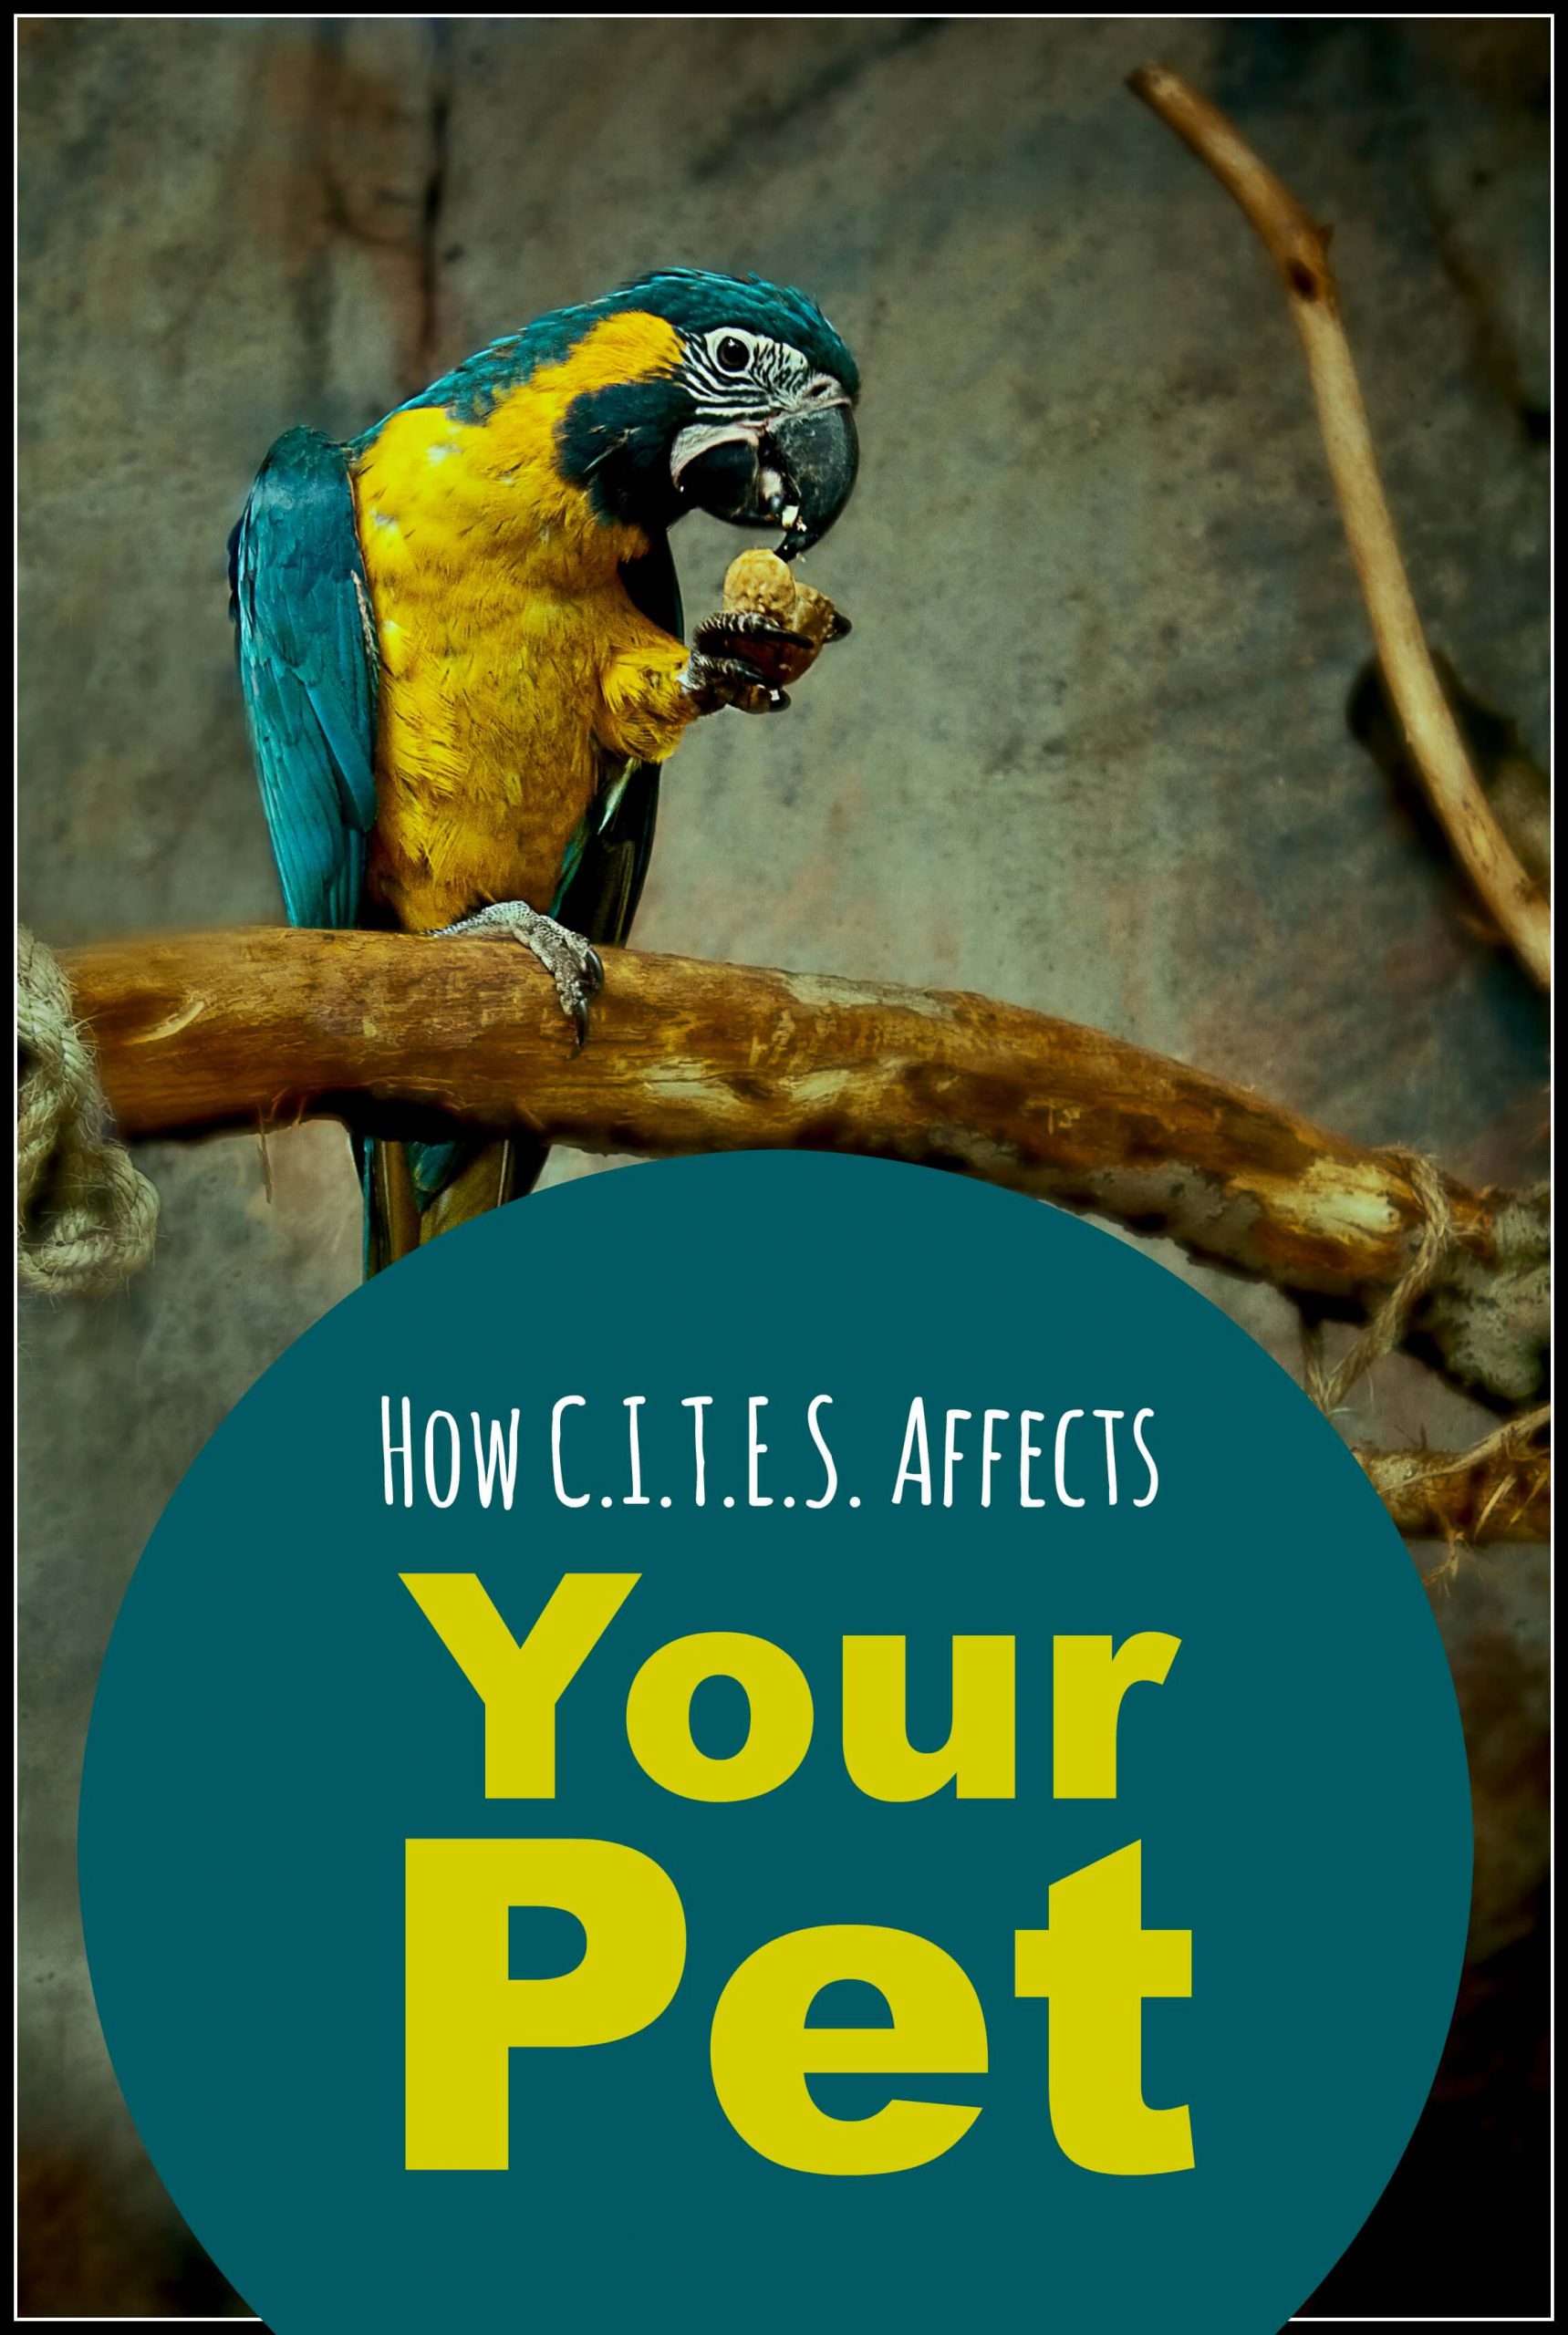 Wondering what CITES is and how it can affect your pet? The rules govern the transportation of reptiles, birds and a range of other exotic pets. Find out what you need to know to stay inside the law by clicking here. 